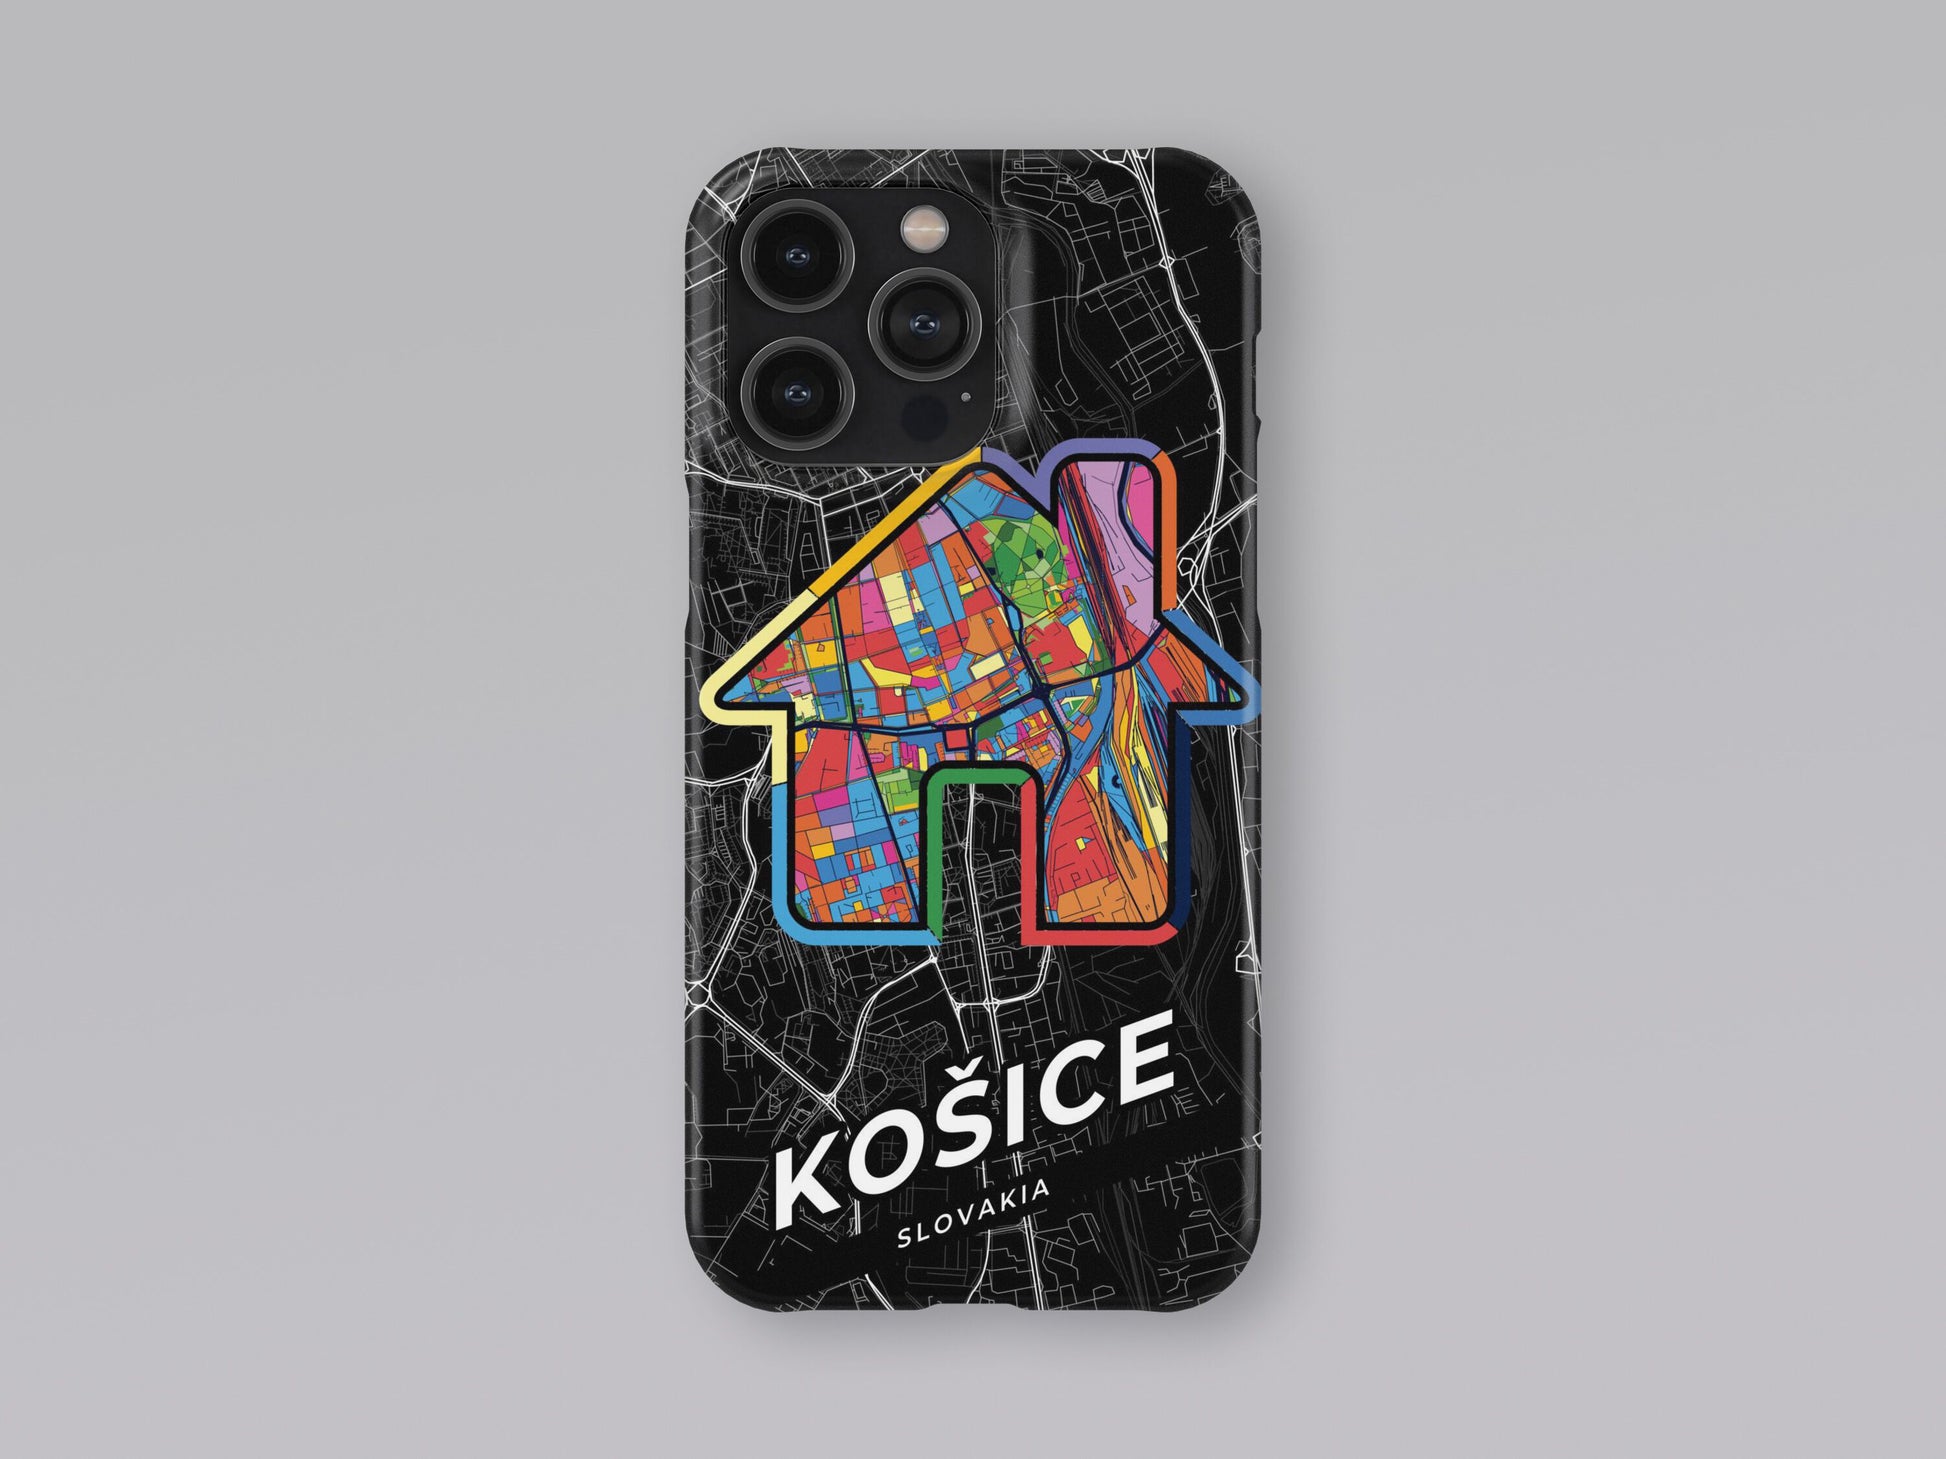 Košice Slovakia slim phone case with colorful icon. Birthday, wedding or housewarming gift. Couple match cases. 3